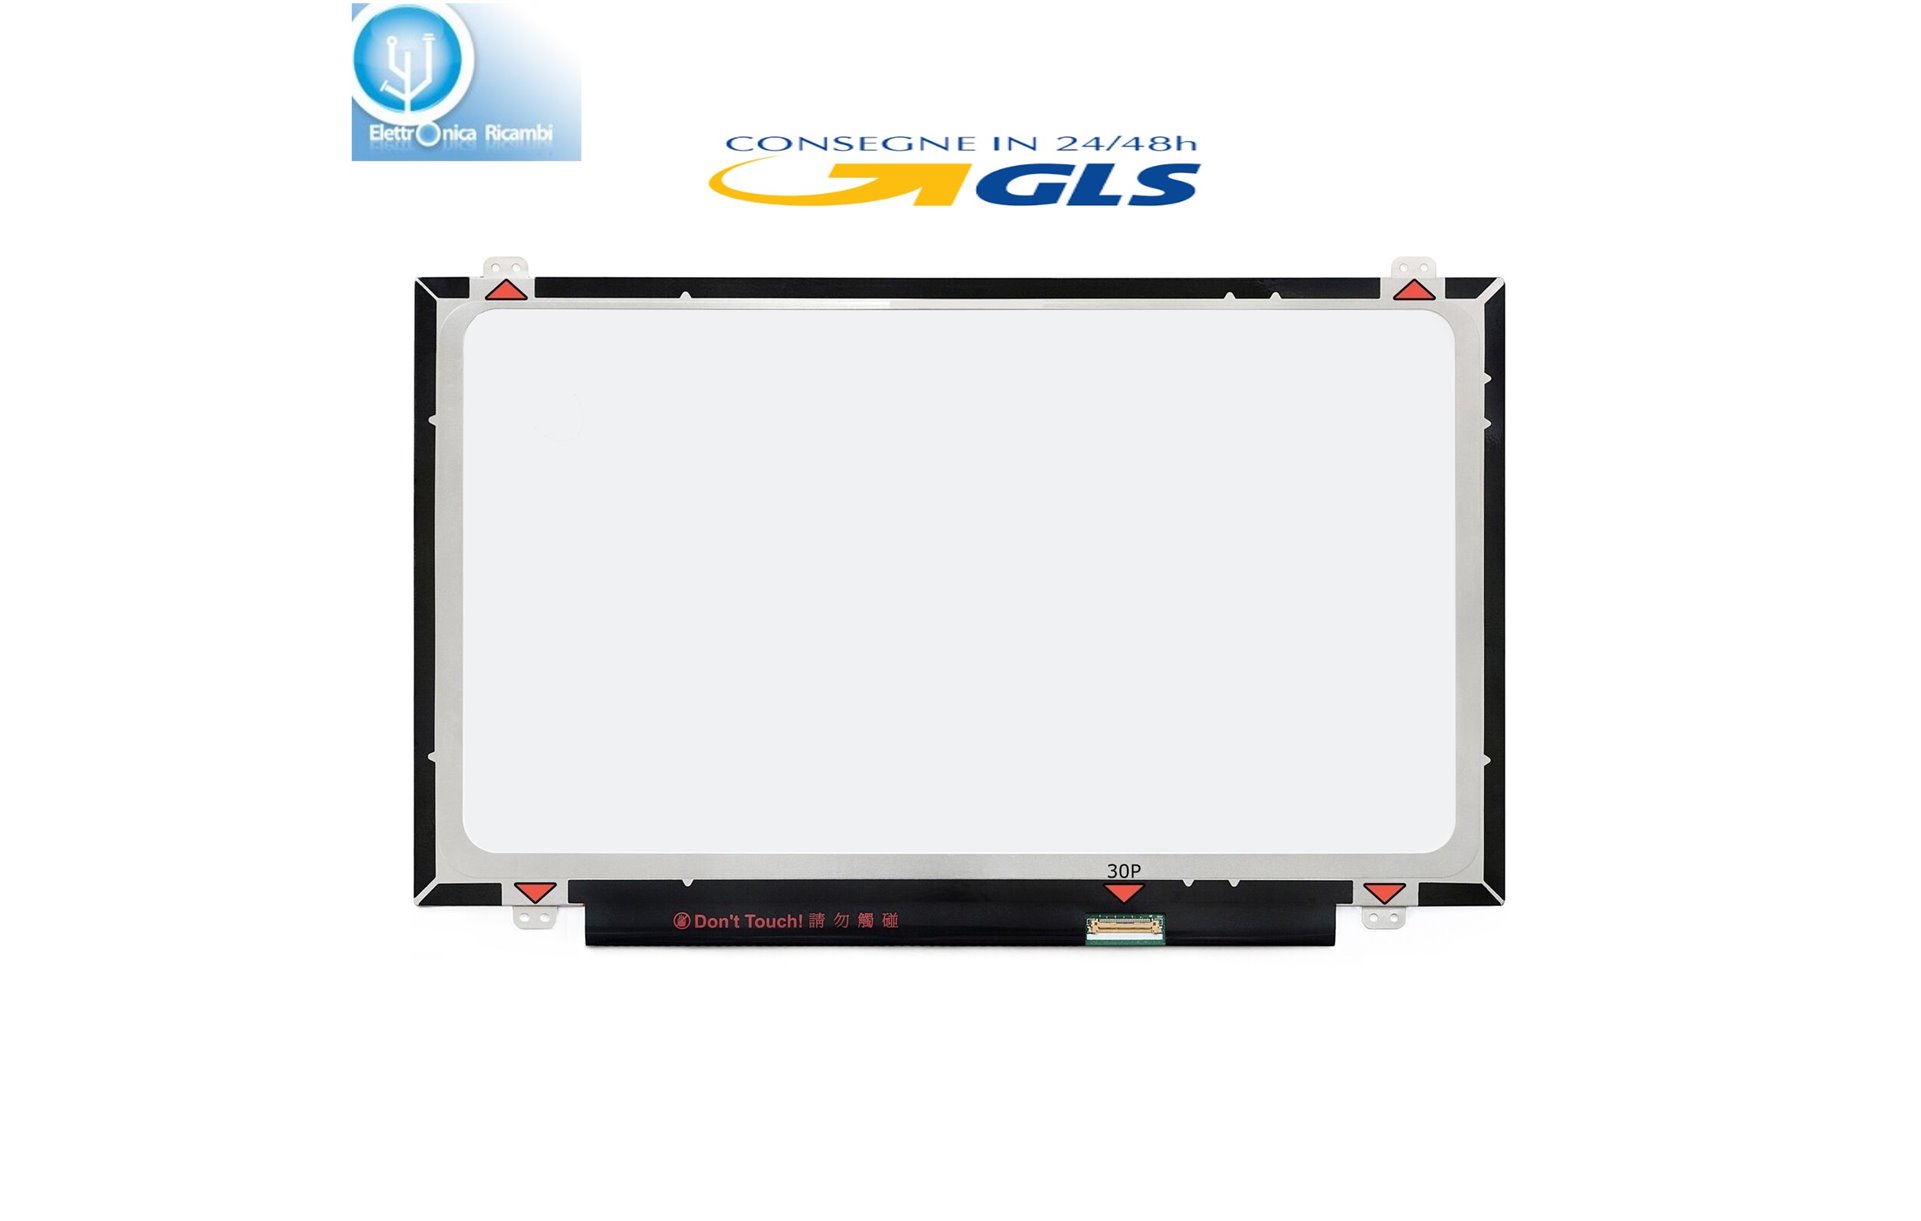 Display LCD Schermo Acer ASPIRE E1-432 SERIES 14.0 LED 30 pin 1366x768